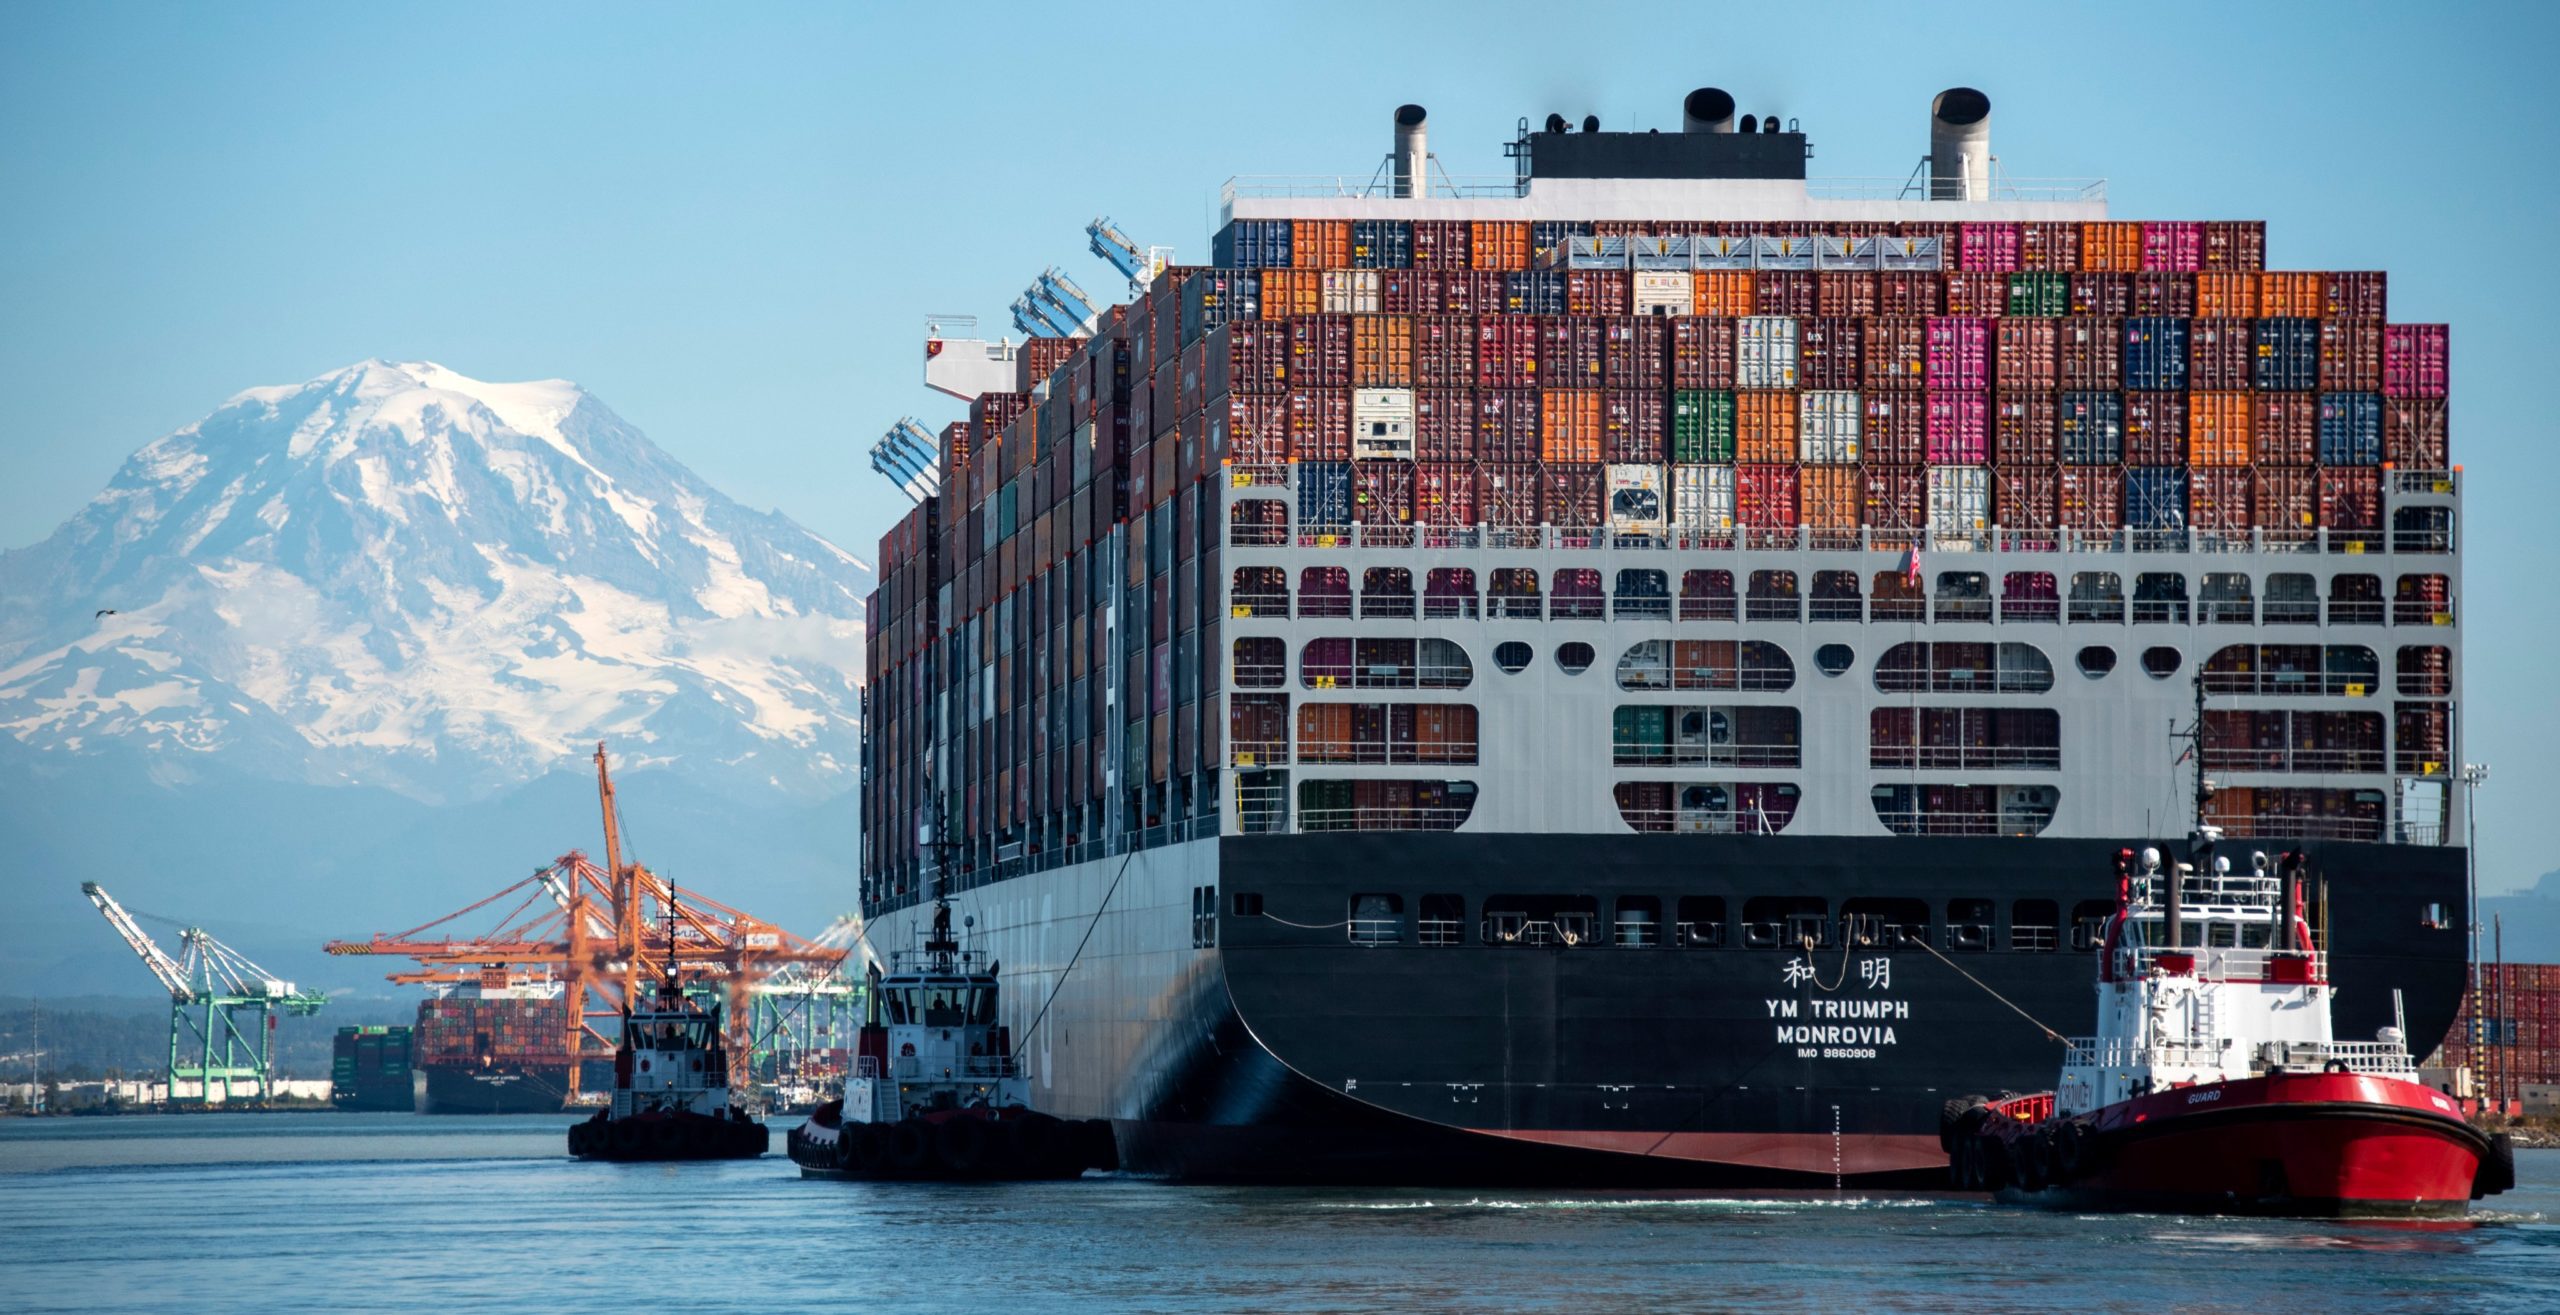 A Rarity Among U.S. Ports, Seattle Still Has Room for More Ships